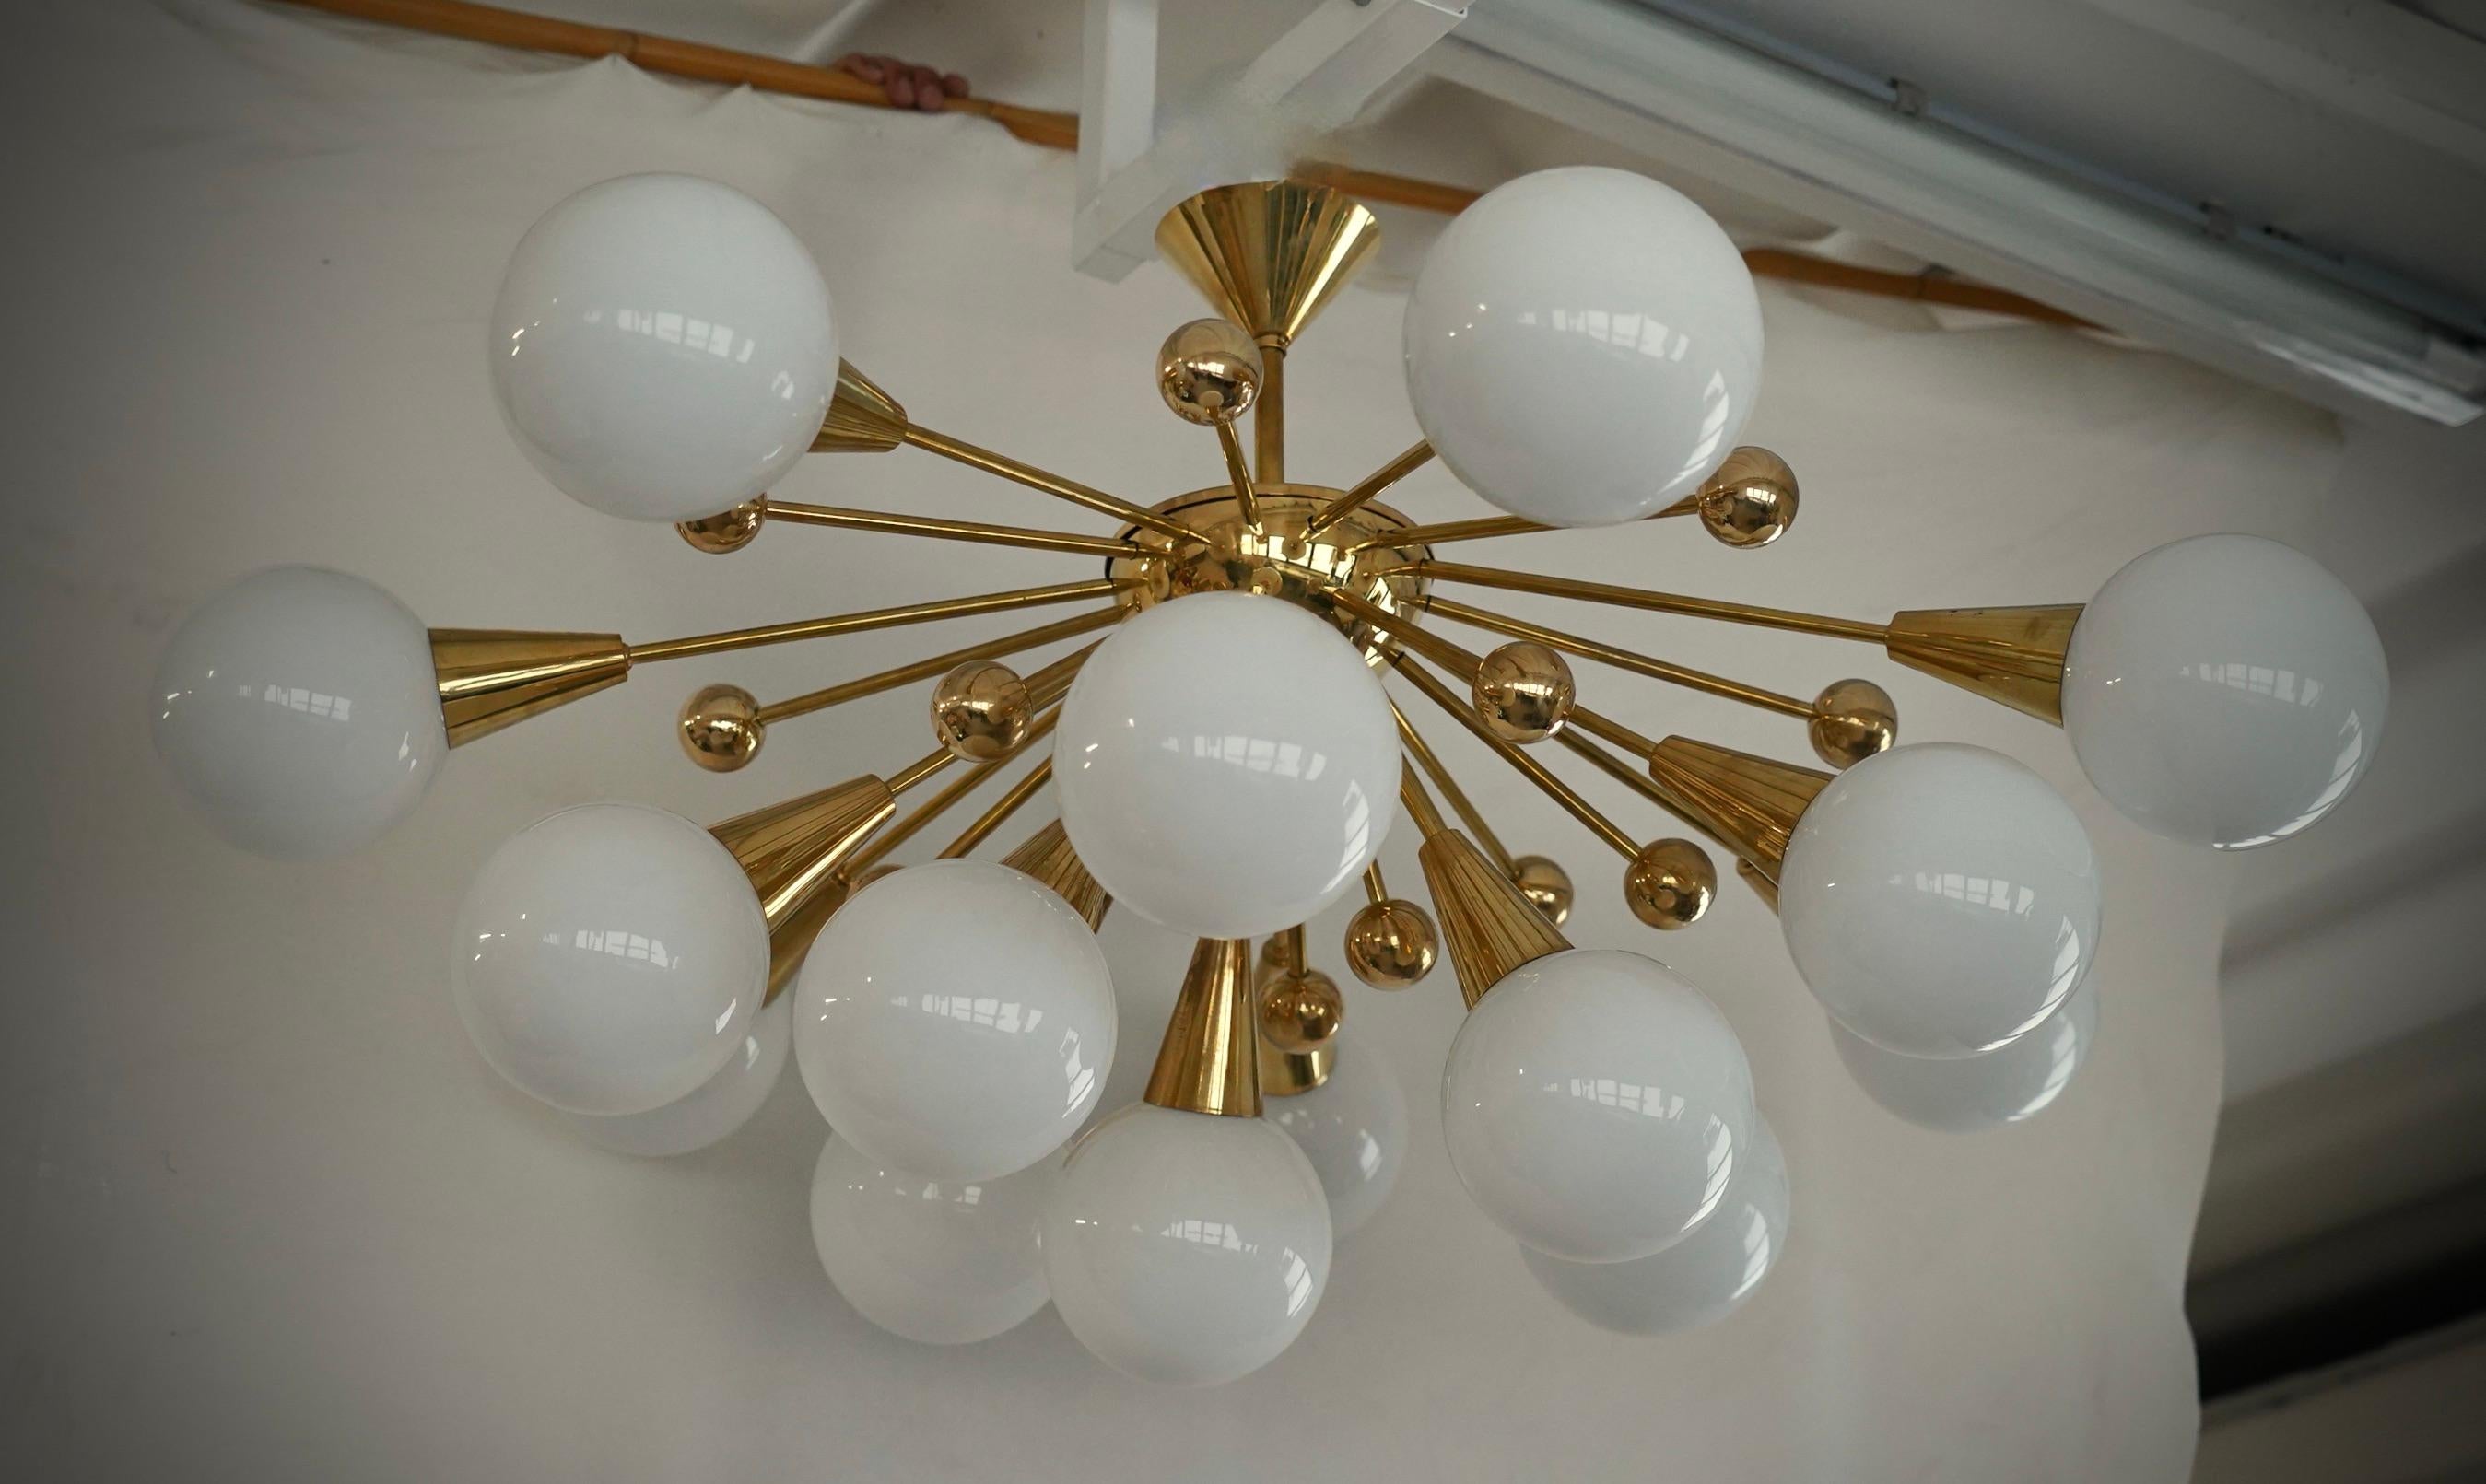 A fantastic white sputnik, with a surprising design and for its very low height, which allows it to fit in both high and low ceilings. Very elegant, it will furnish and decorate your entire home.

The chandelier has a central structure in brass, a